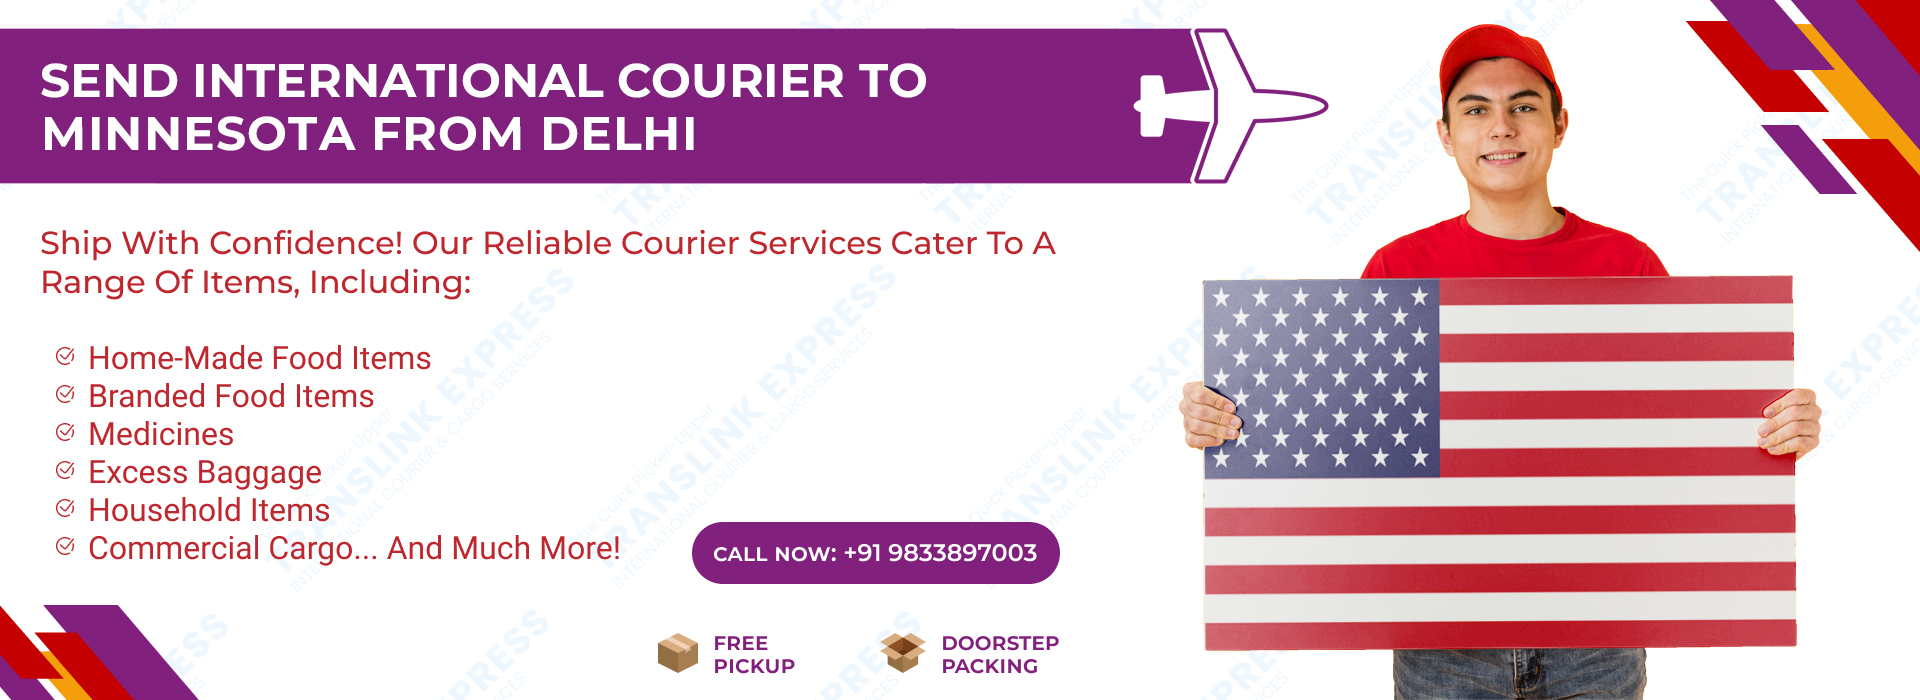 Courier to Minnesota From Delhi